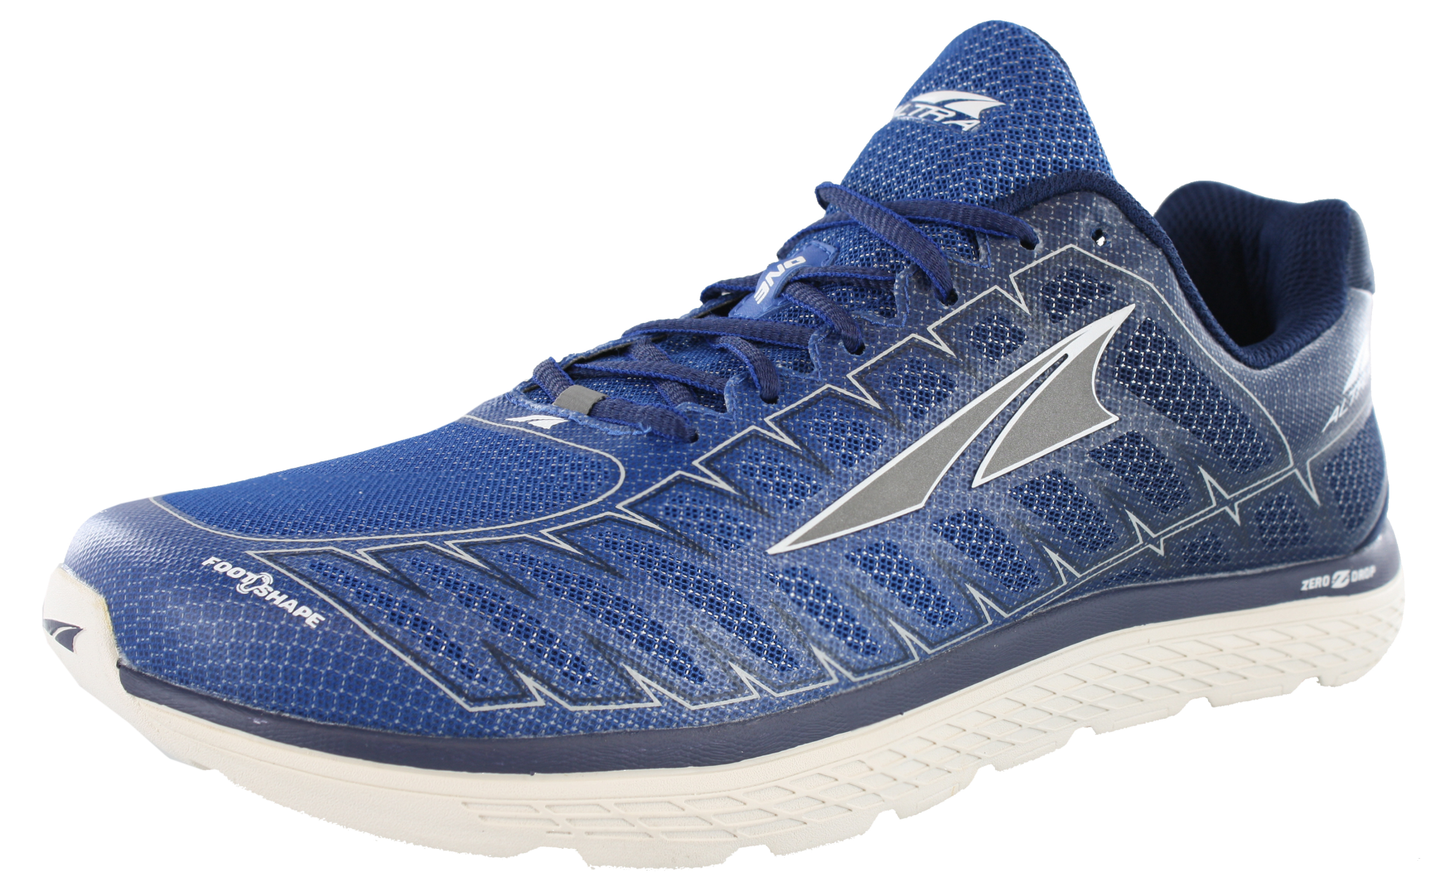 Lateral view of blue/grey Altra Men's One V3 Zero Drop Foot Shape Running Shoes